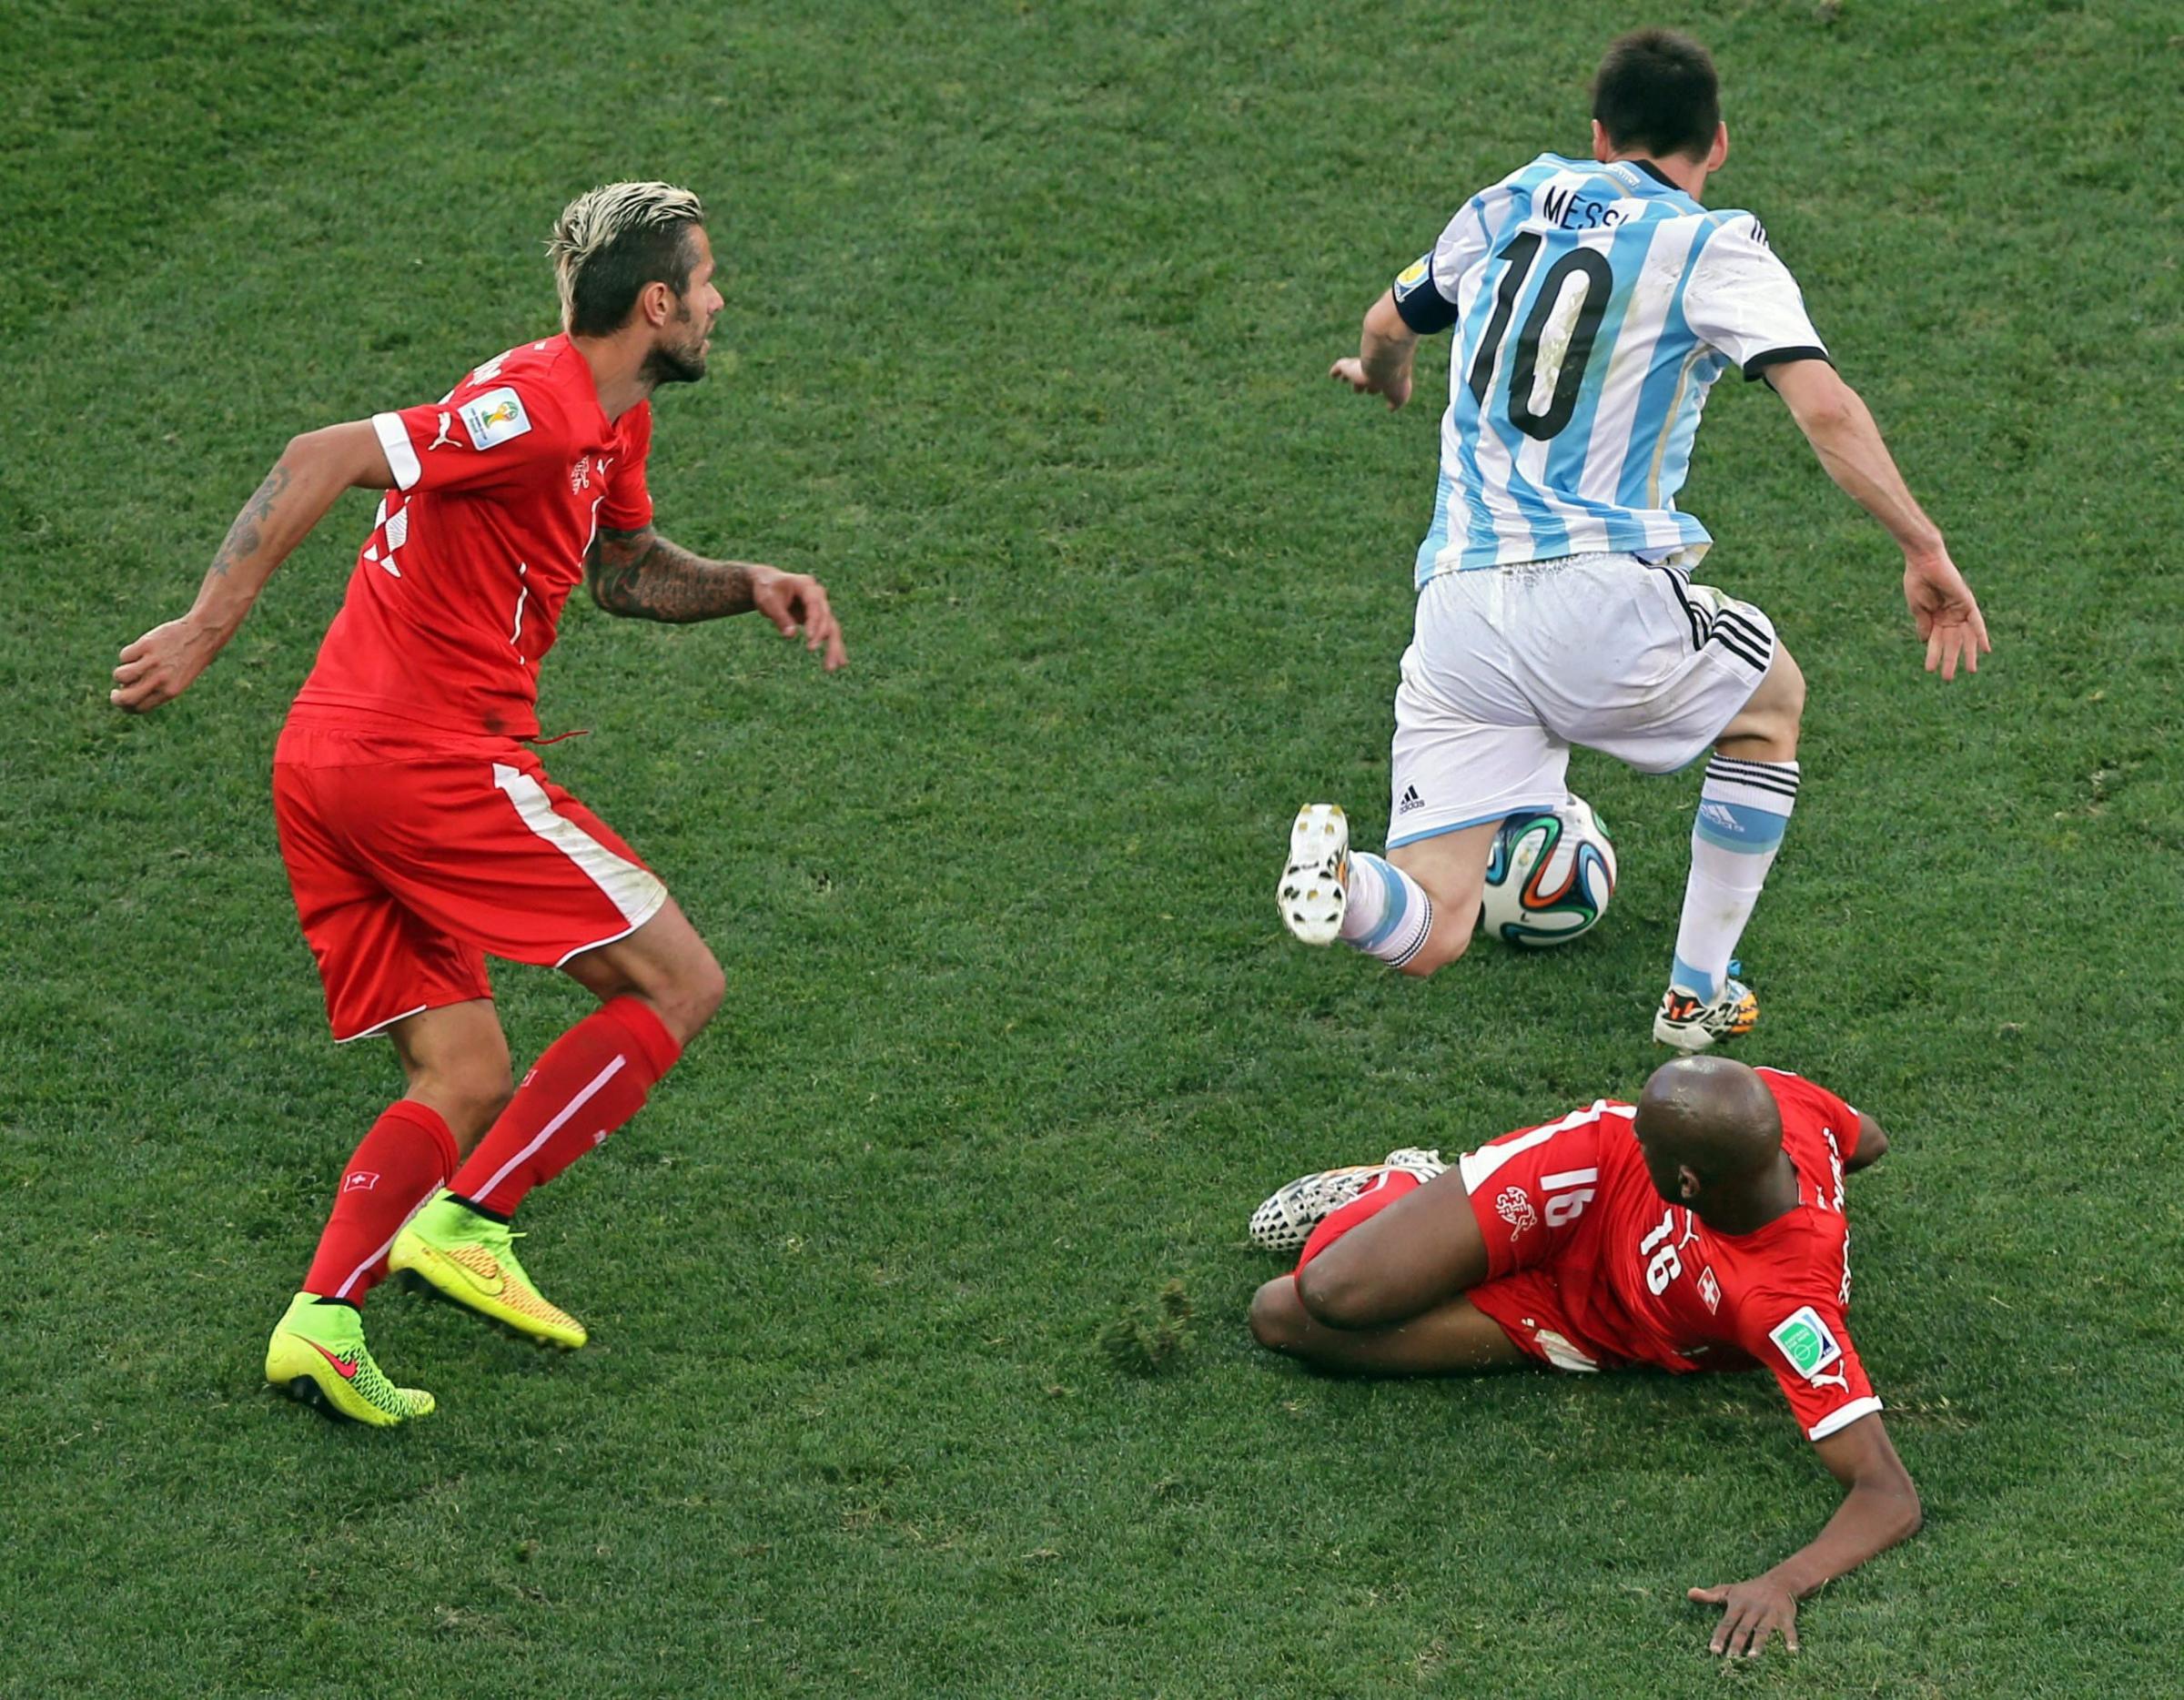 Argentina's Lionel Messi escapes from Switzerland's Valon Behrami (L) and Gelson Fernandes (R) during the FIFA World Cup 2014 round of 16 match between Argentina and Switzerland at the Arena Corinthians in Sao Paulo, Brazil, on July 1, 2014.